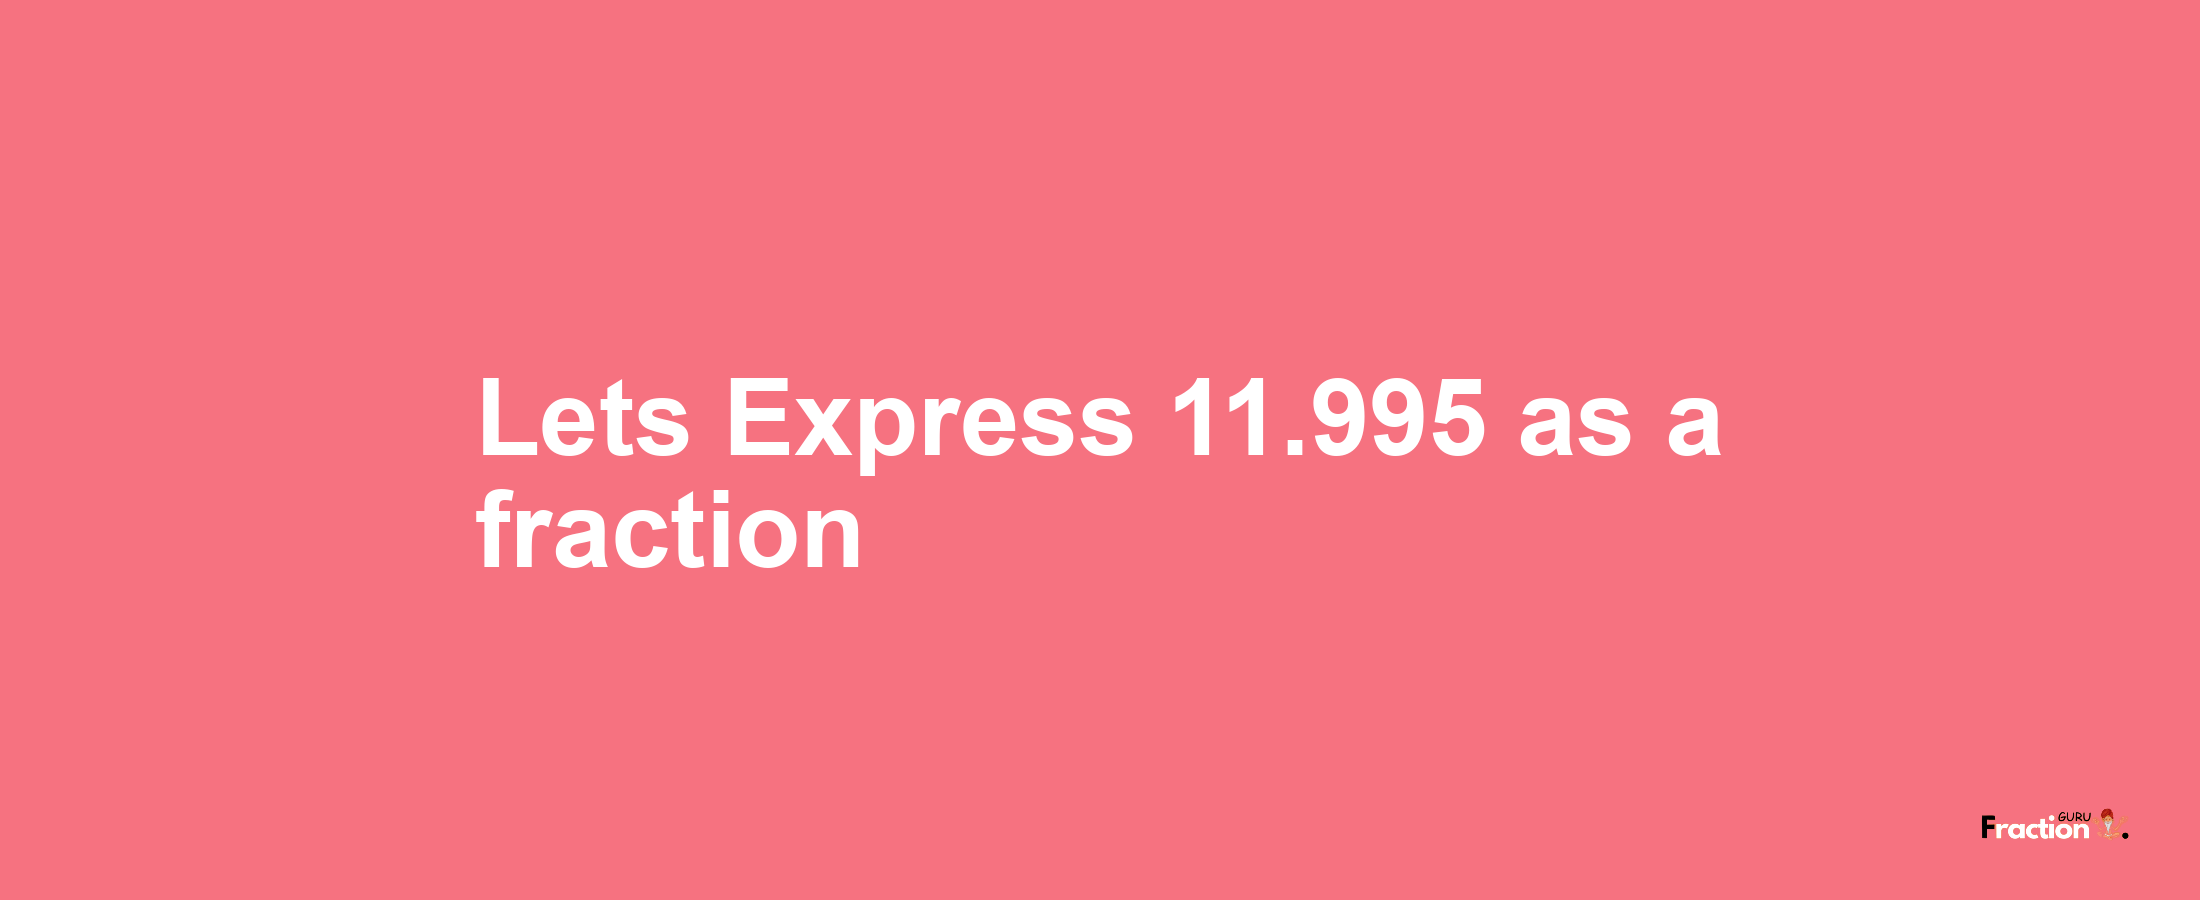 Lets Express 11.995 as afraction